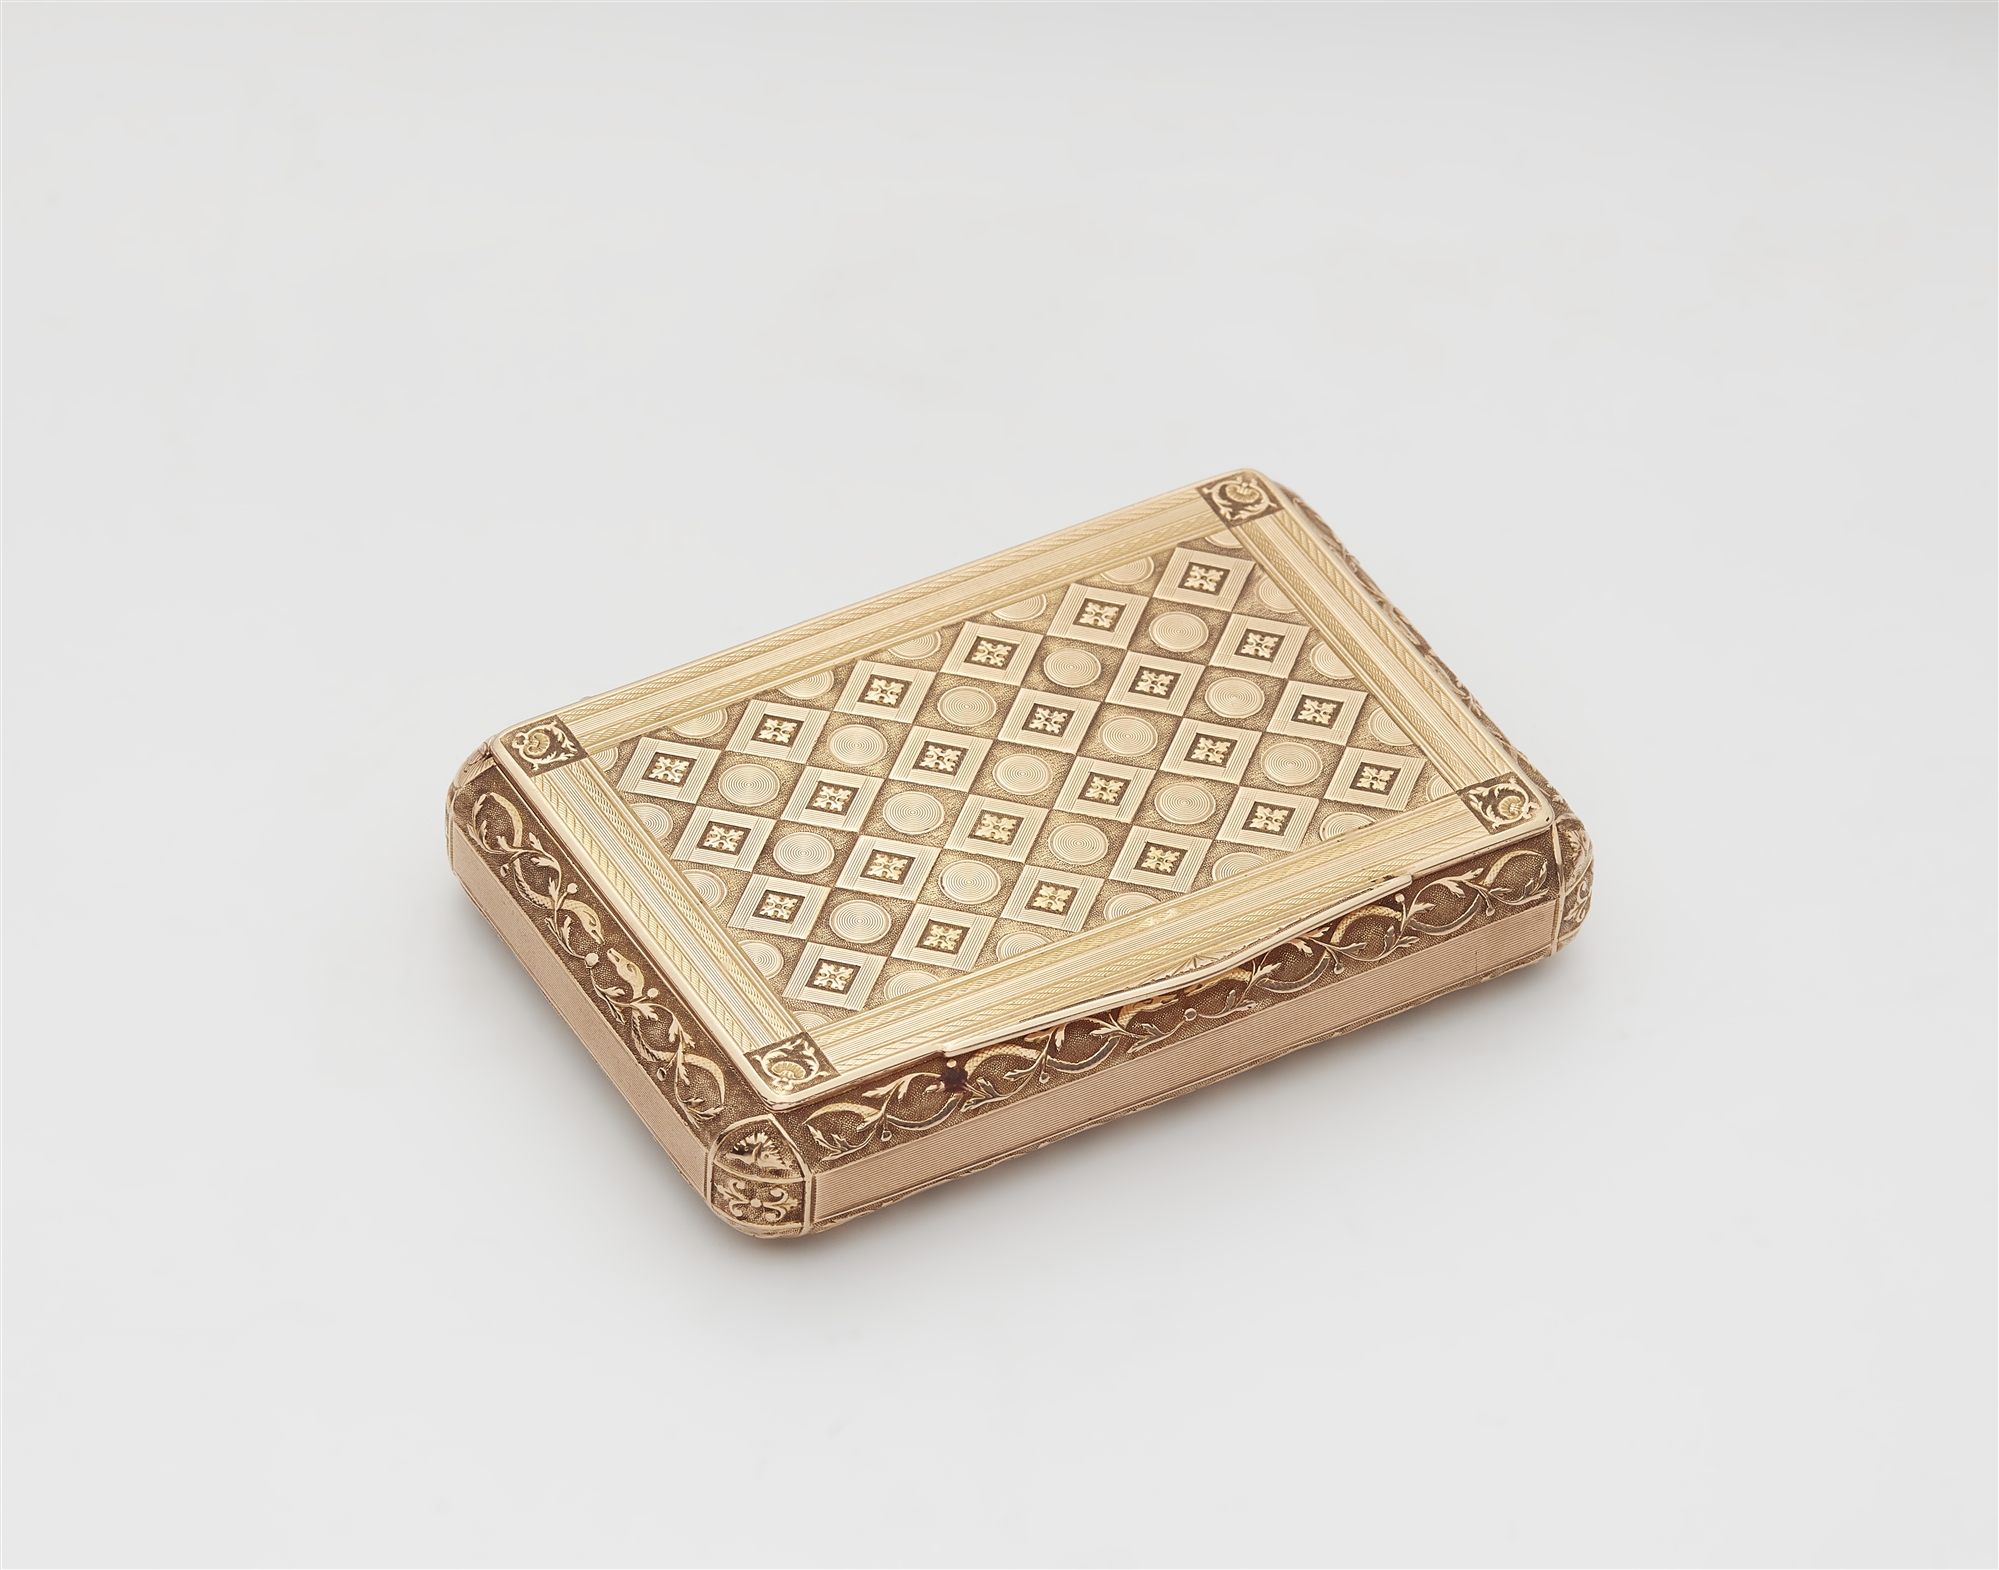 A 14k gold presentation snuff box from Prince Wilhelm of Prussia